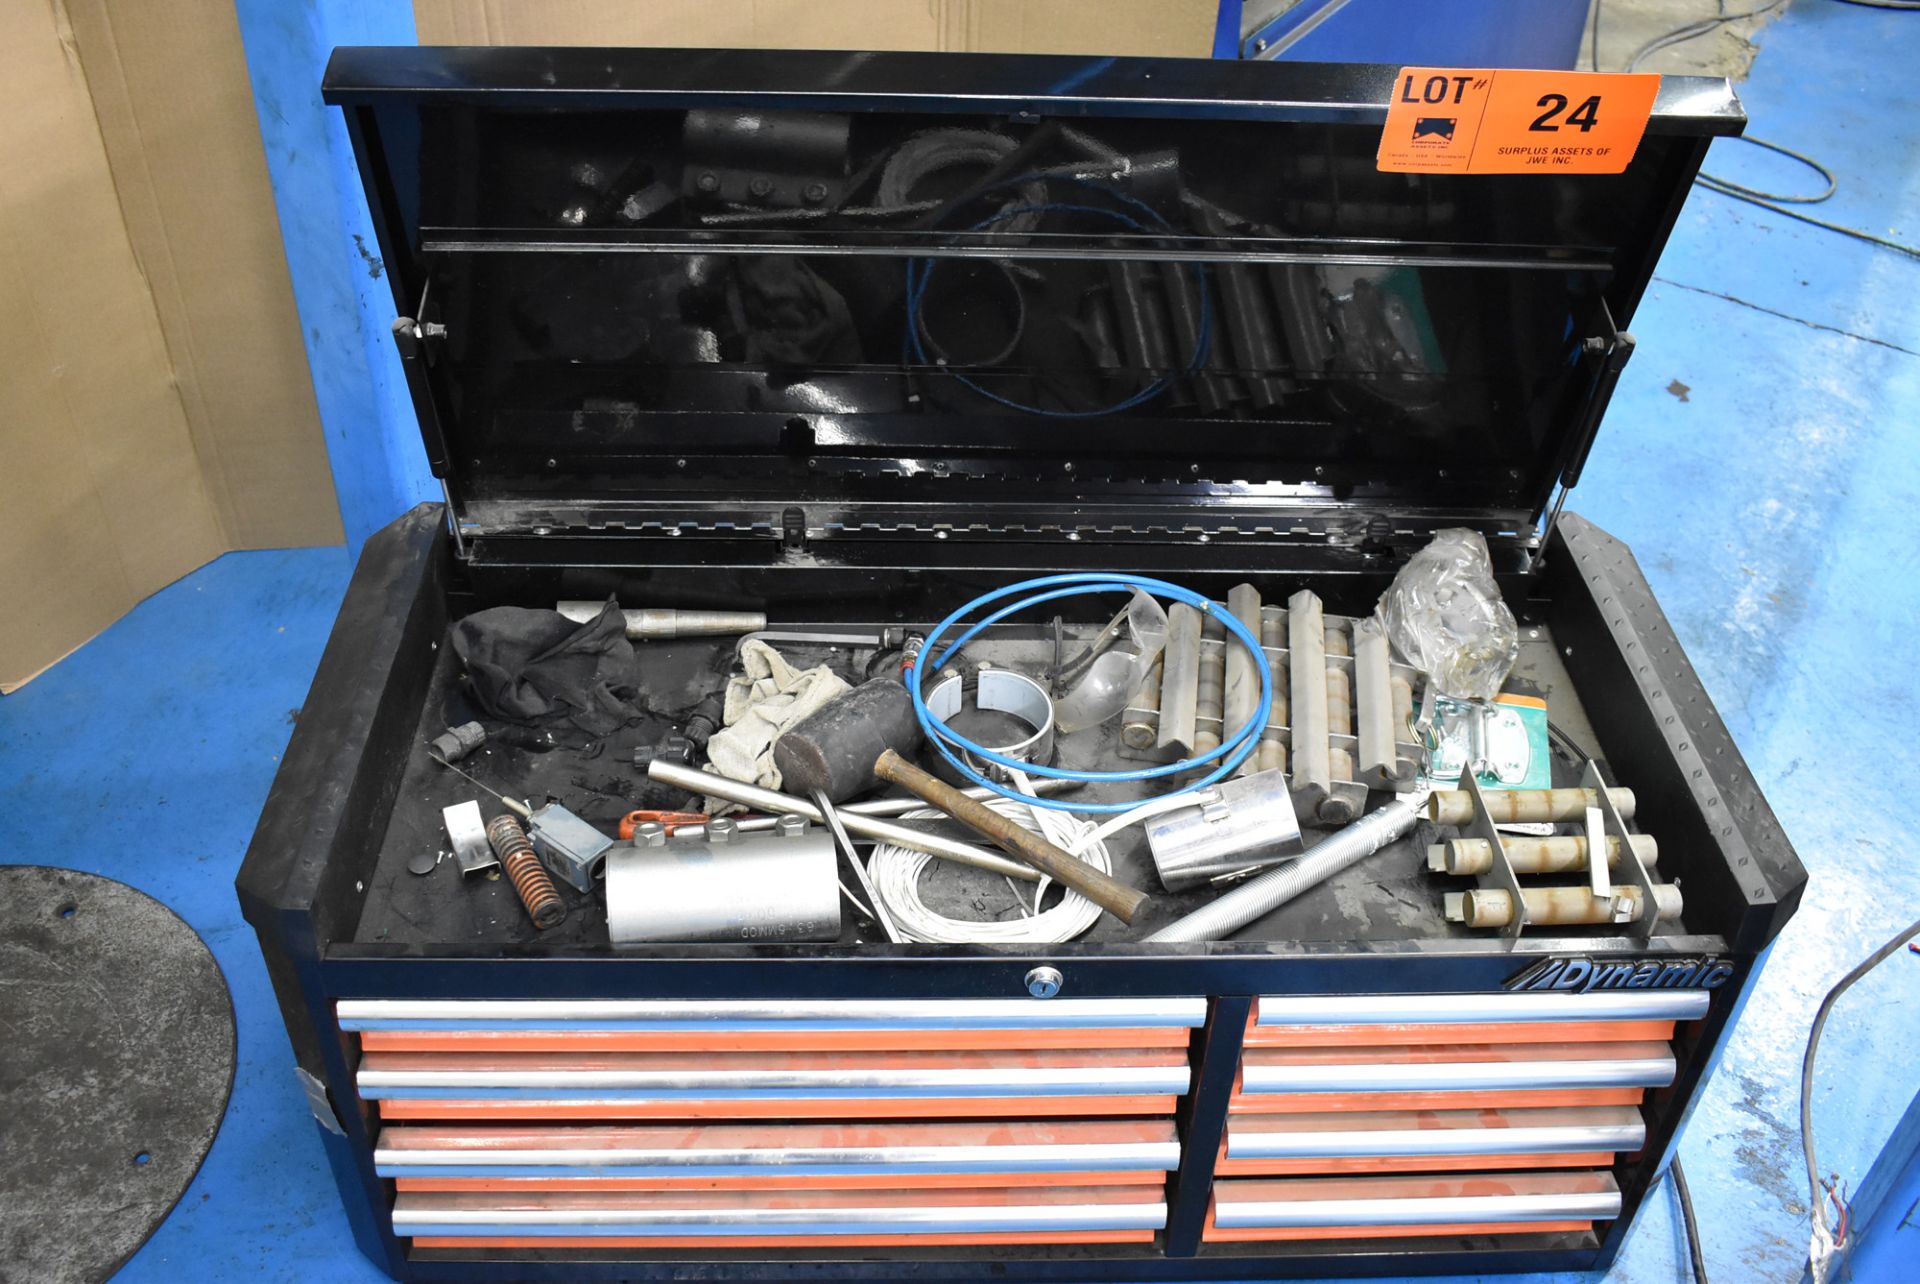 LOT/ DYNAMIC 8-DRAWER TOOL CHEST WITH LIEN FA INJECTION MOLDER SPARE PARTS & TOOLS